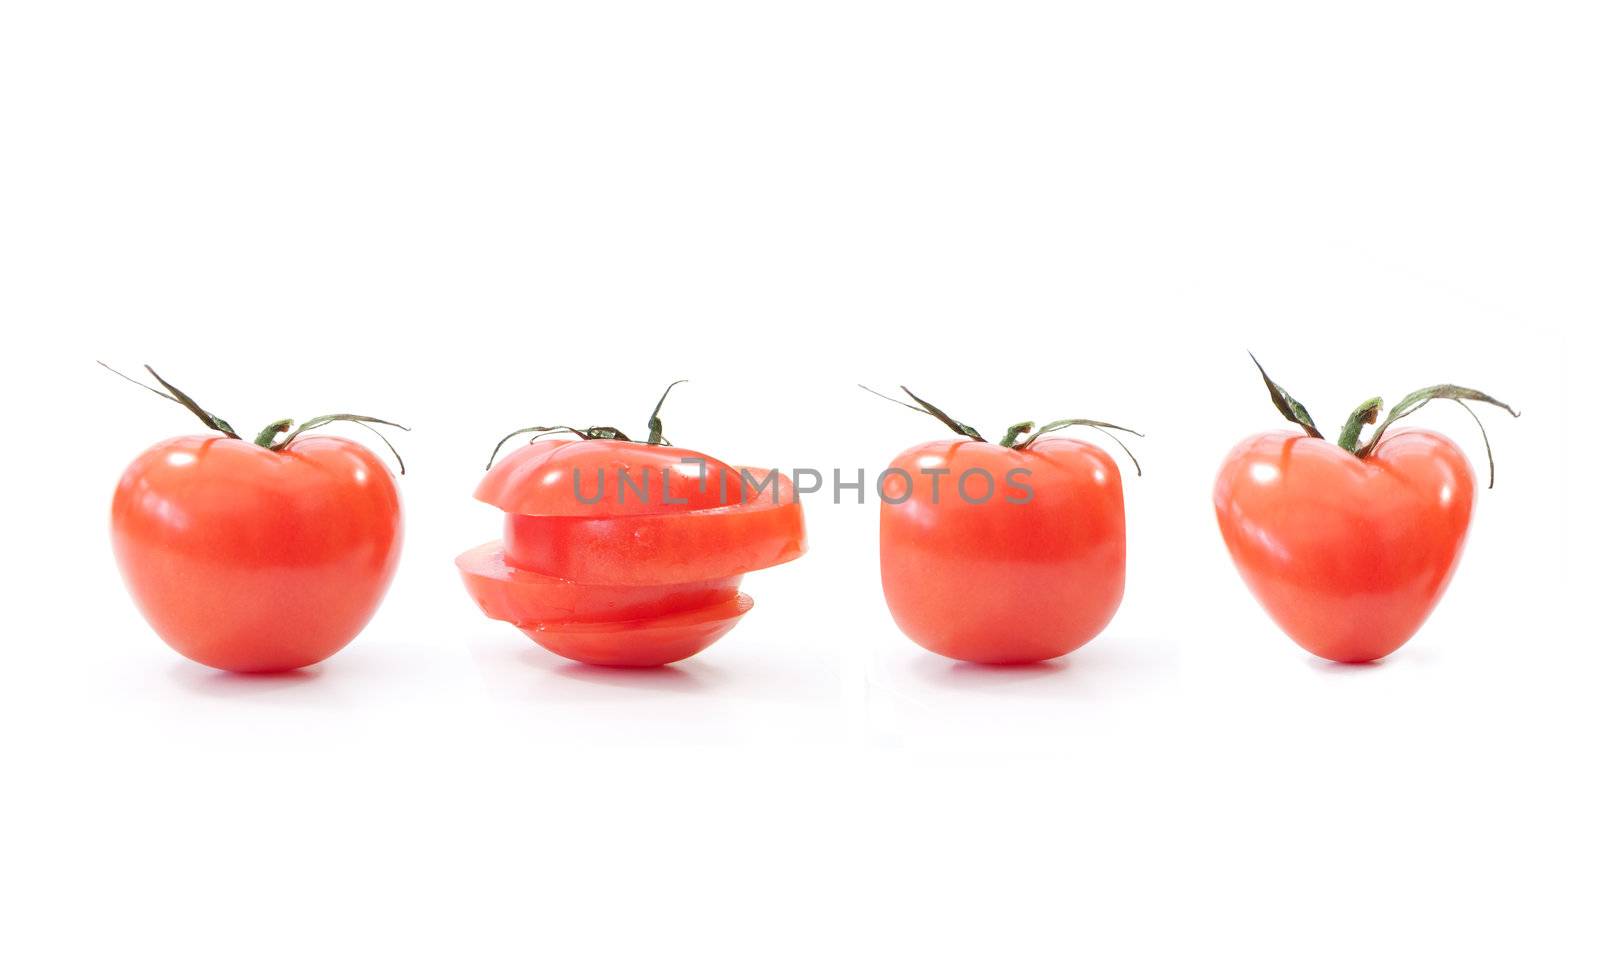 Shapes of tomatoes by unikpix